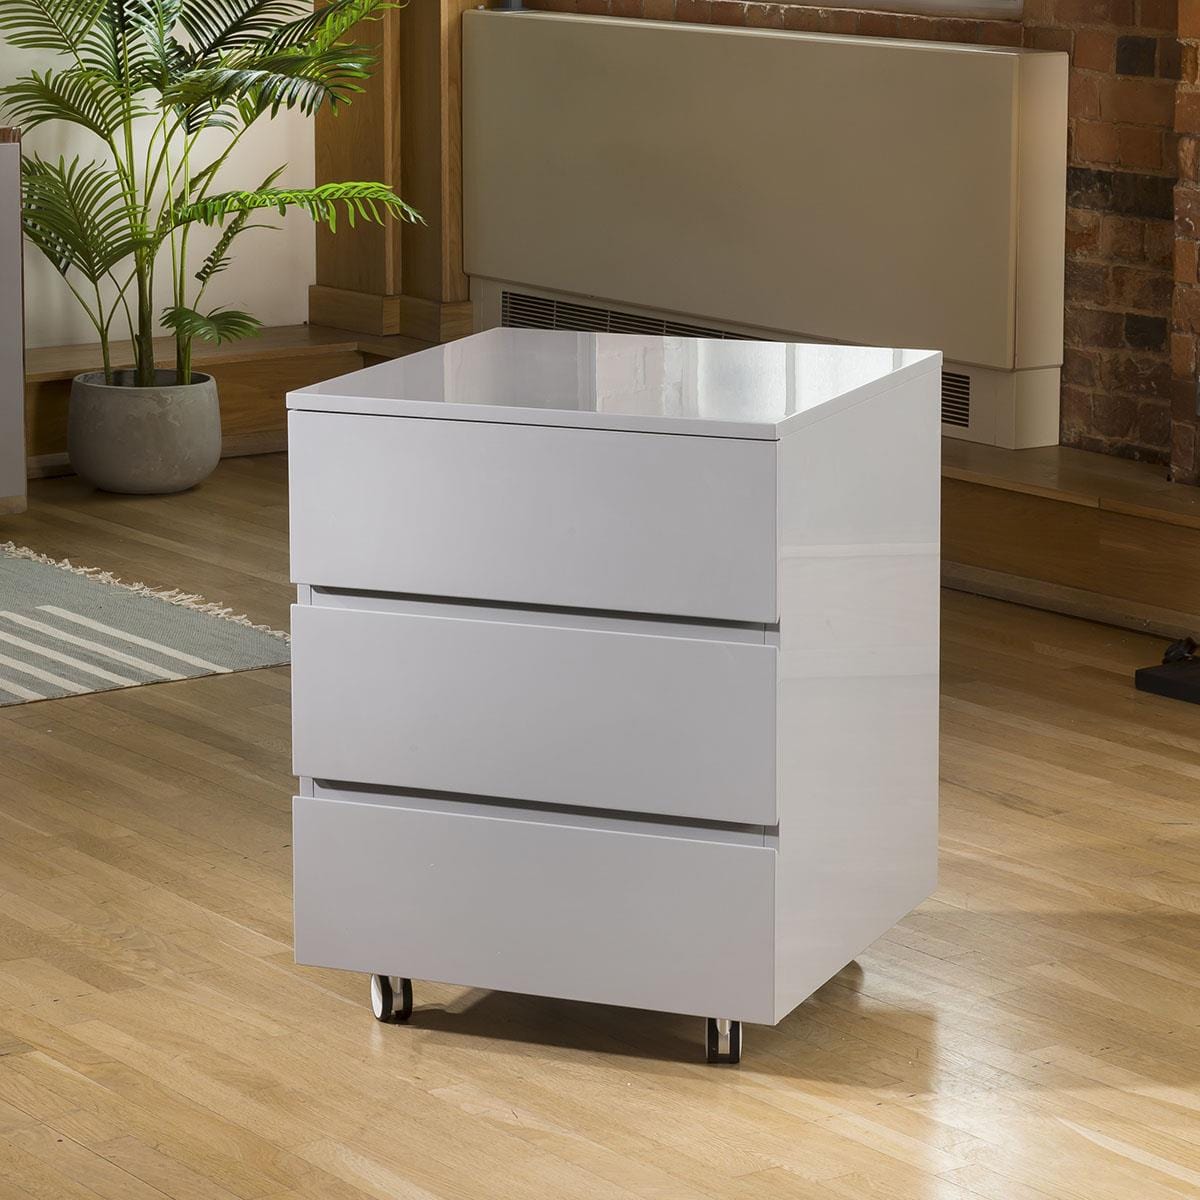 Quatropi 2 Desk arrangement with chest of drawers in a grey gloss and stainless finish